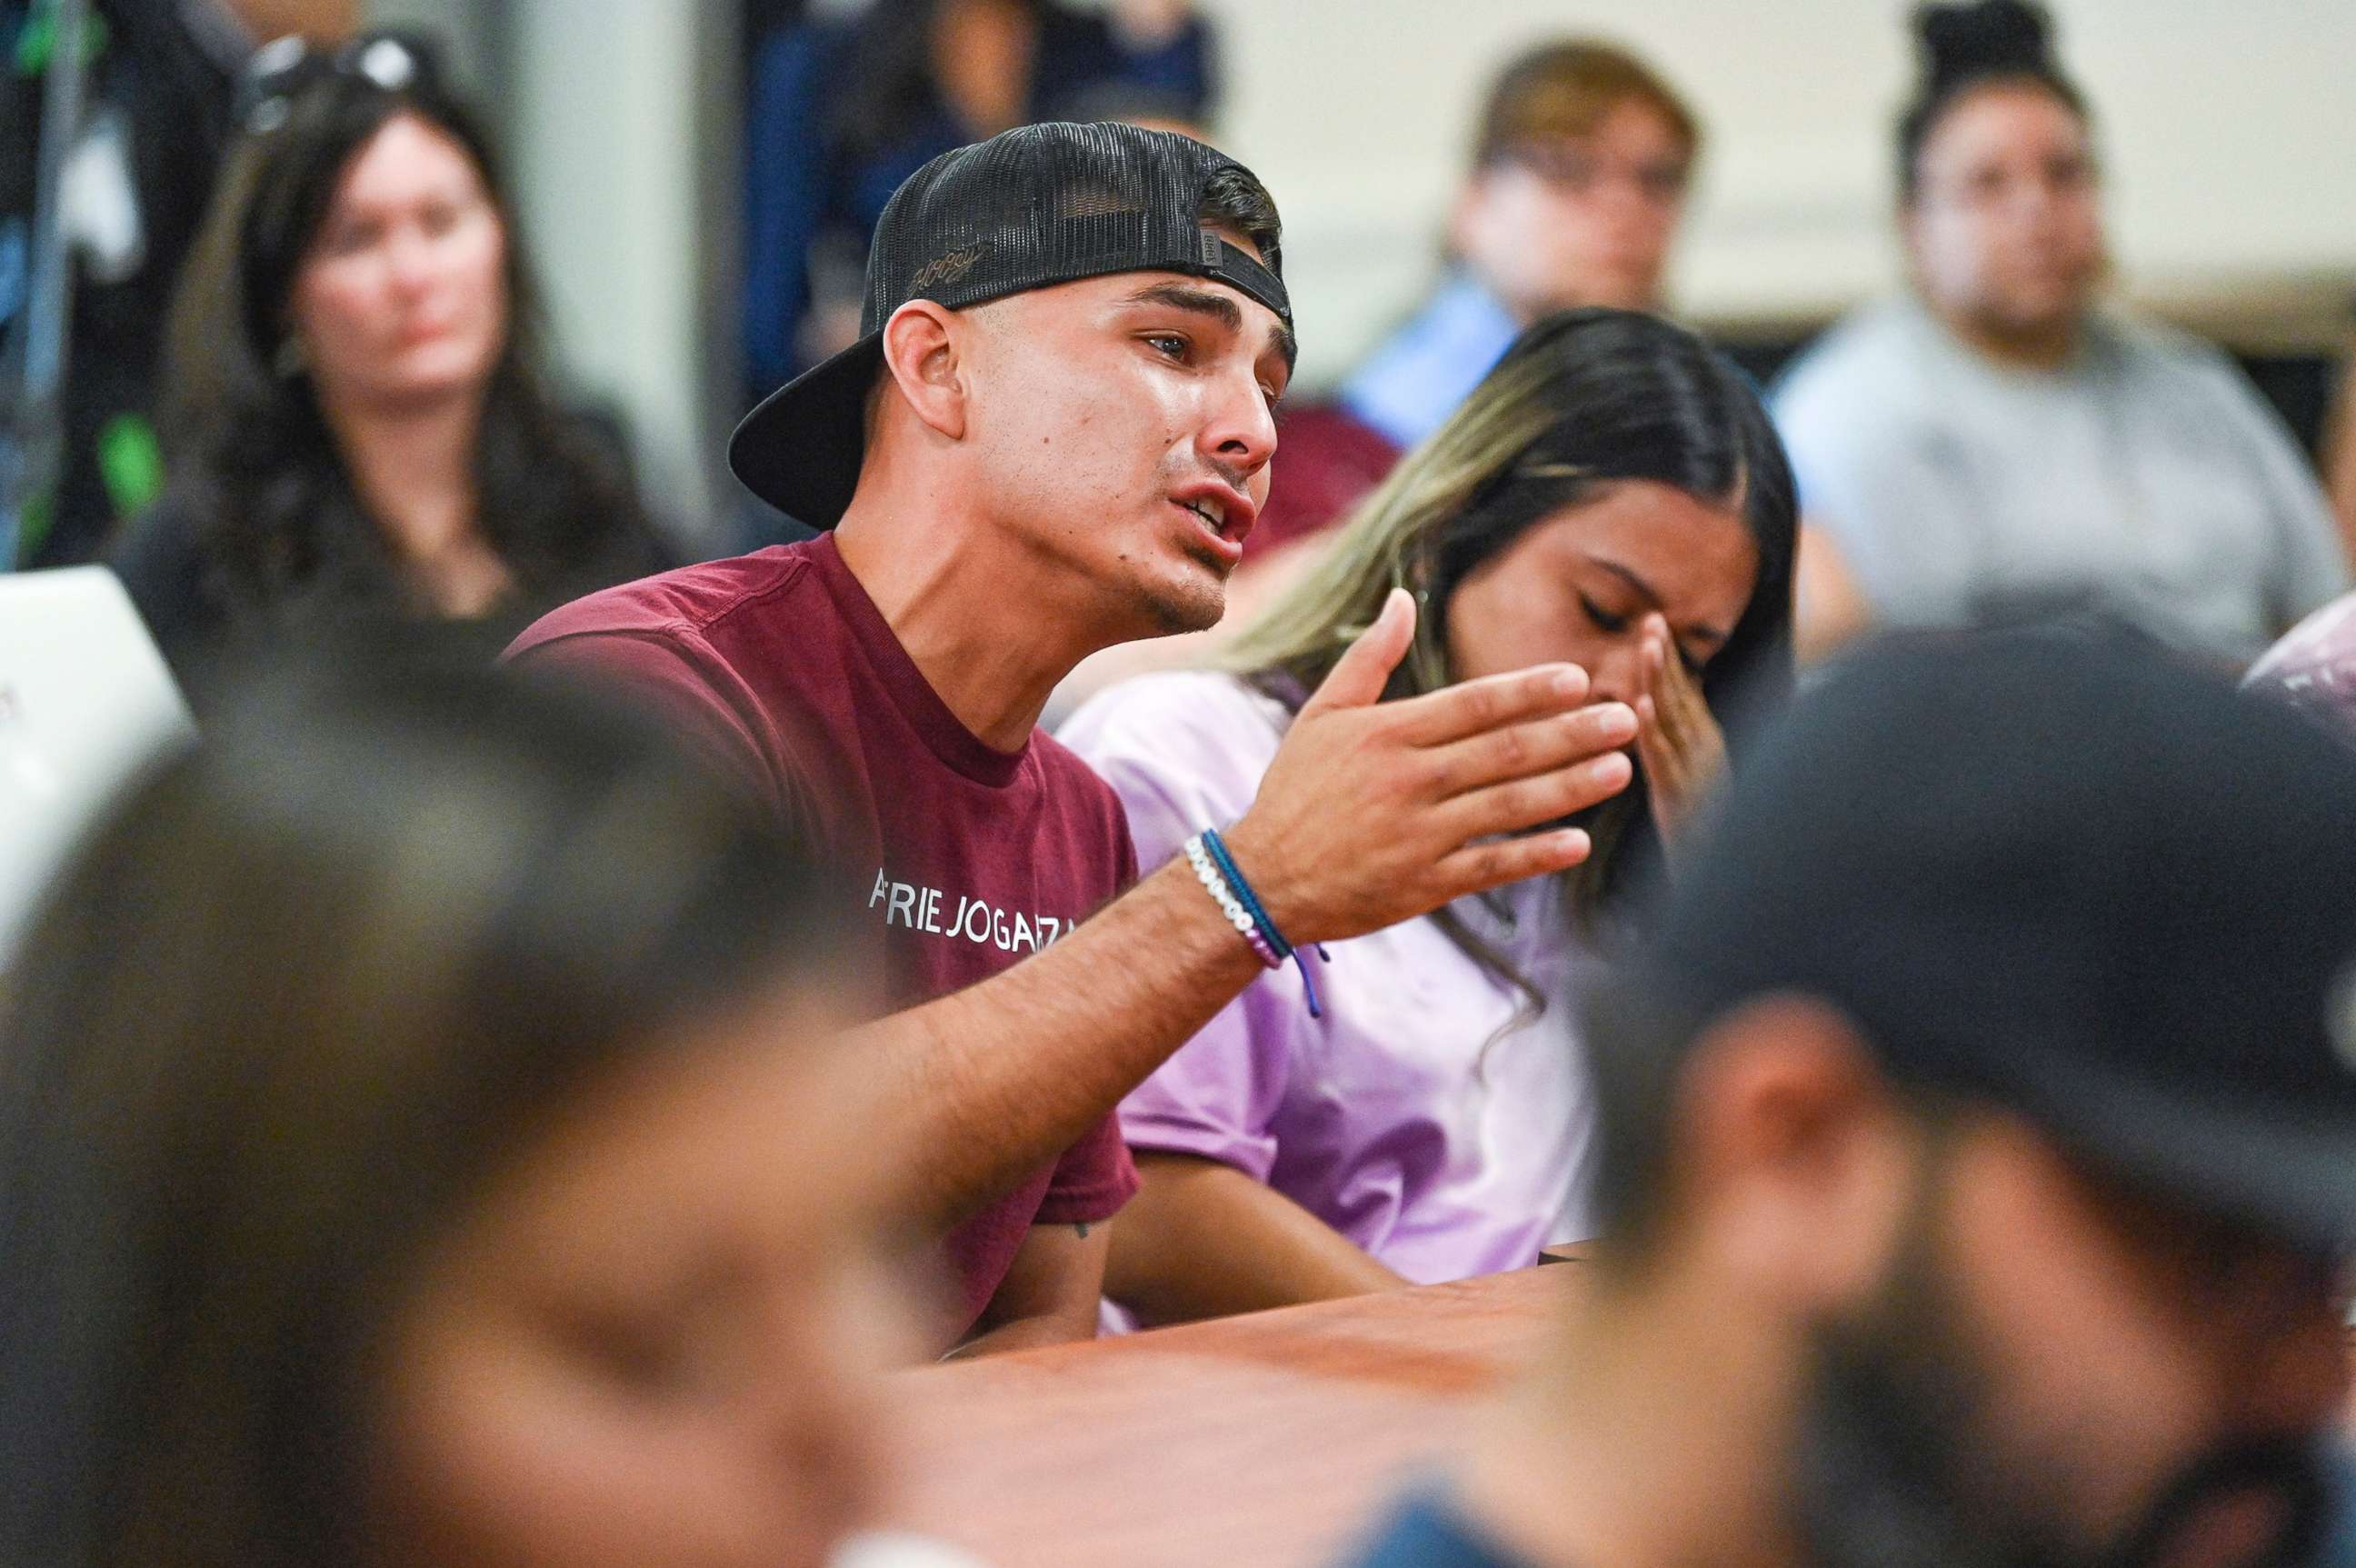 PHOTO: Angel Garza, who is the father of Amerie Jo Garza, a child who was killed at Robb Elementary School in Uvalde, pleads for answers during a City Council meeting, June 30, 2022, in San Antonio, Texas, June 30, 2022. 